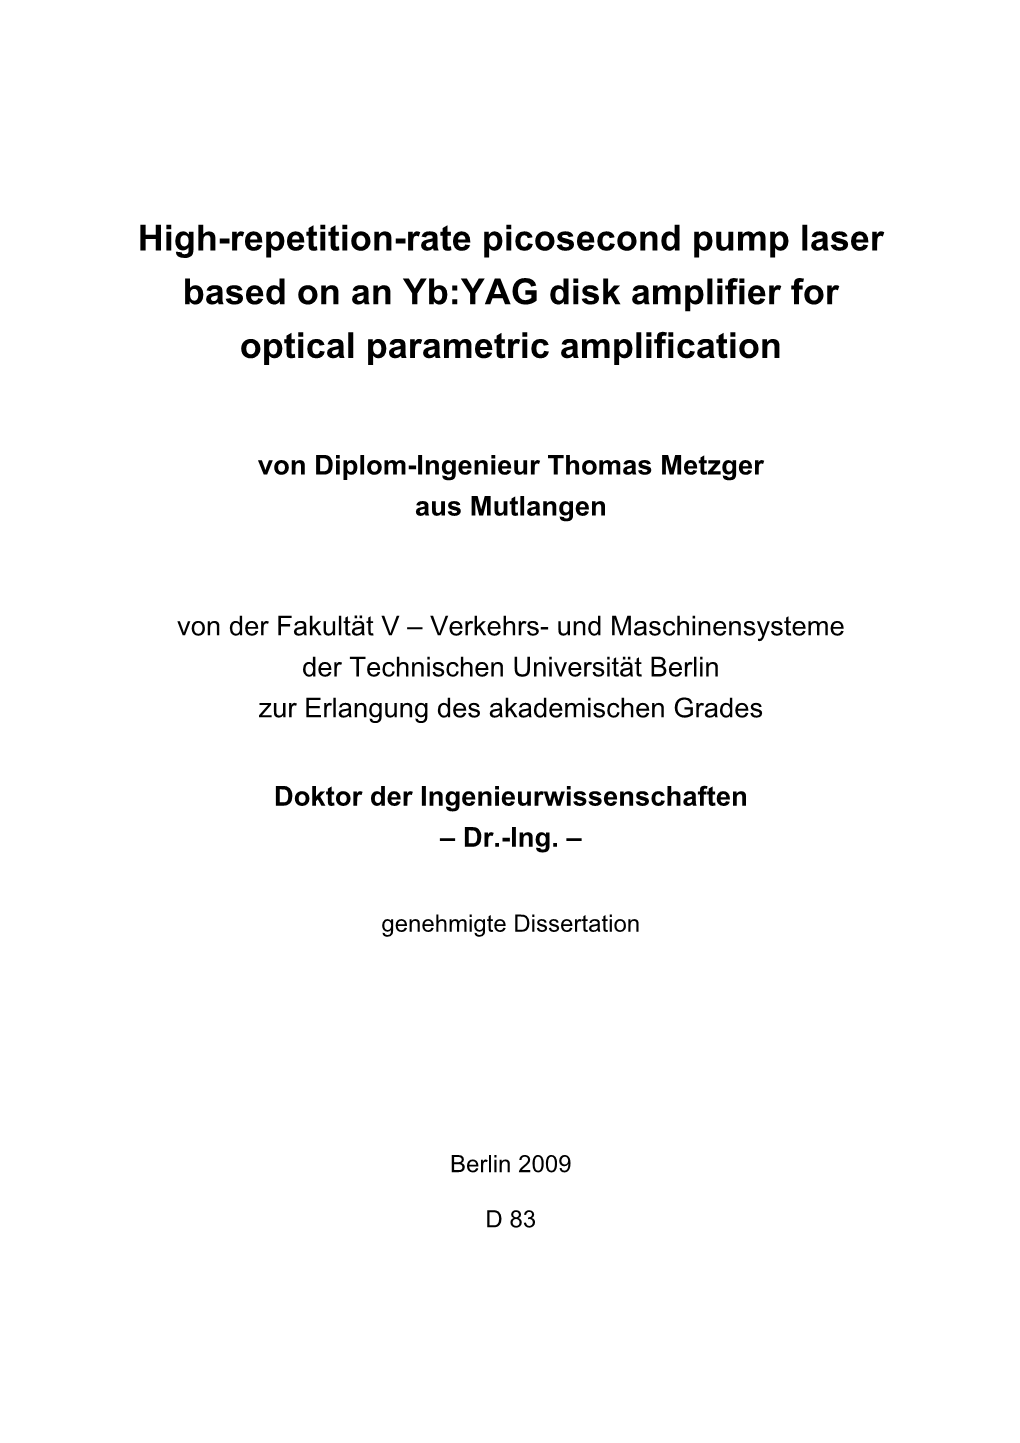 High-Repetition-Rate Picosecond Pump Laser Based on an Yb:YAG Disk Amplifier for Optical Parametric Amplification